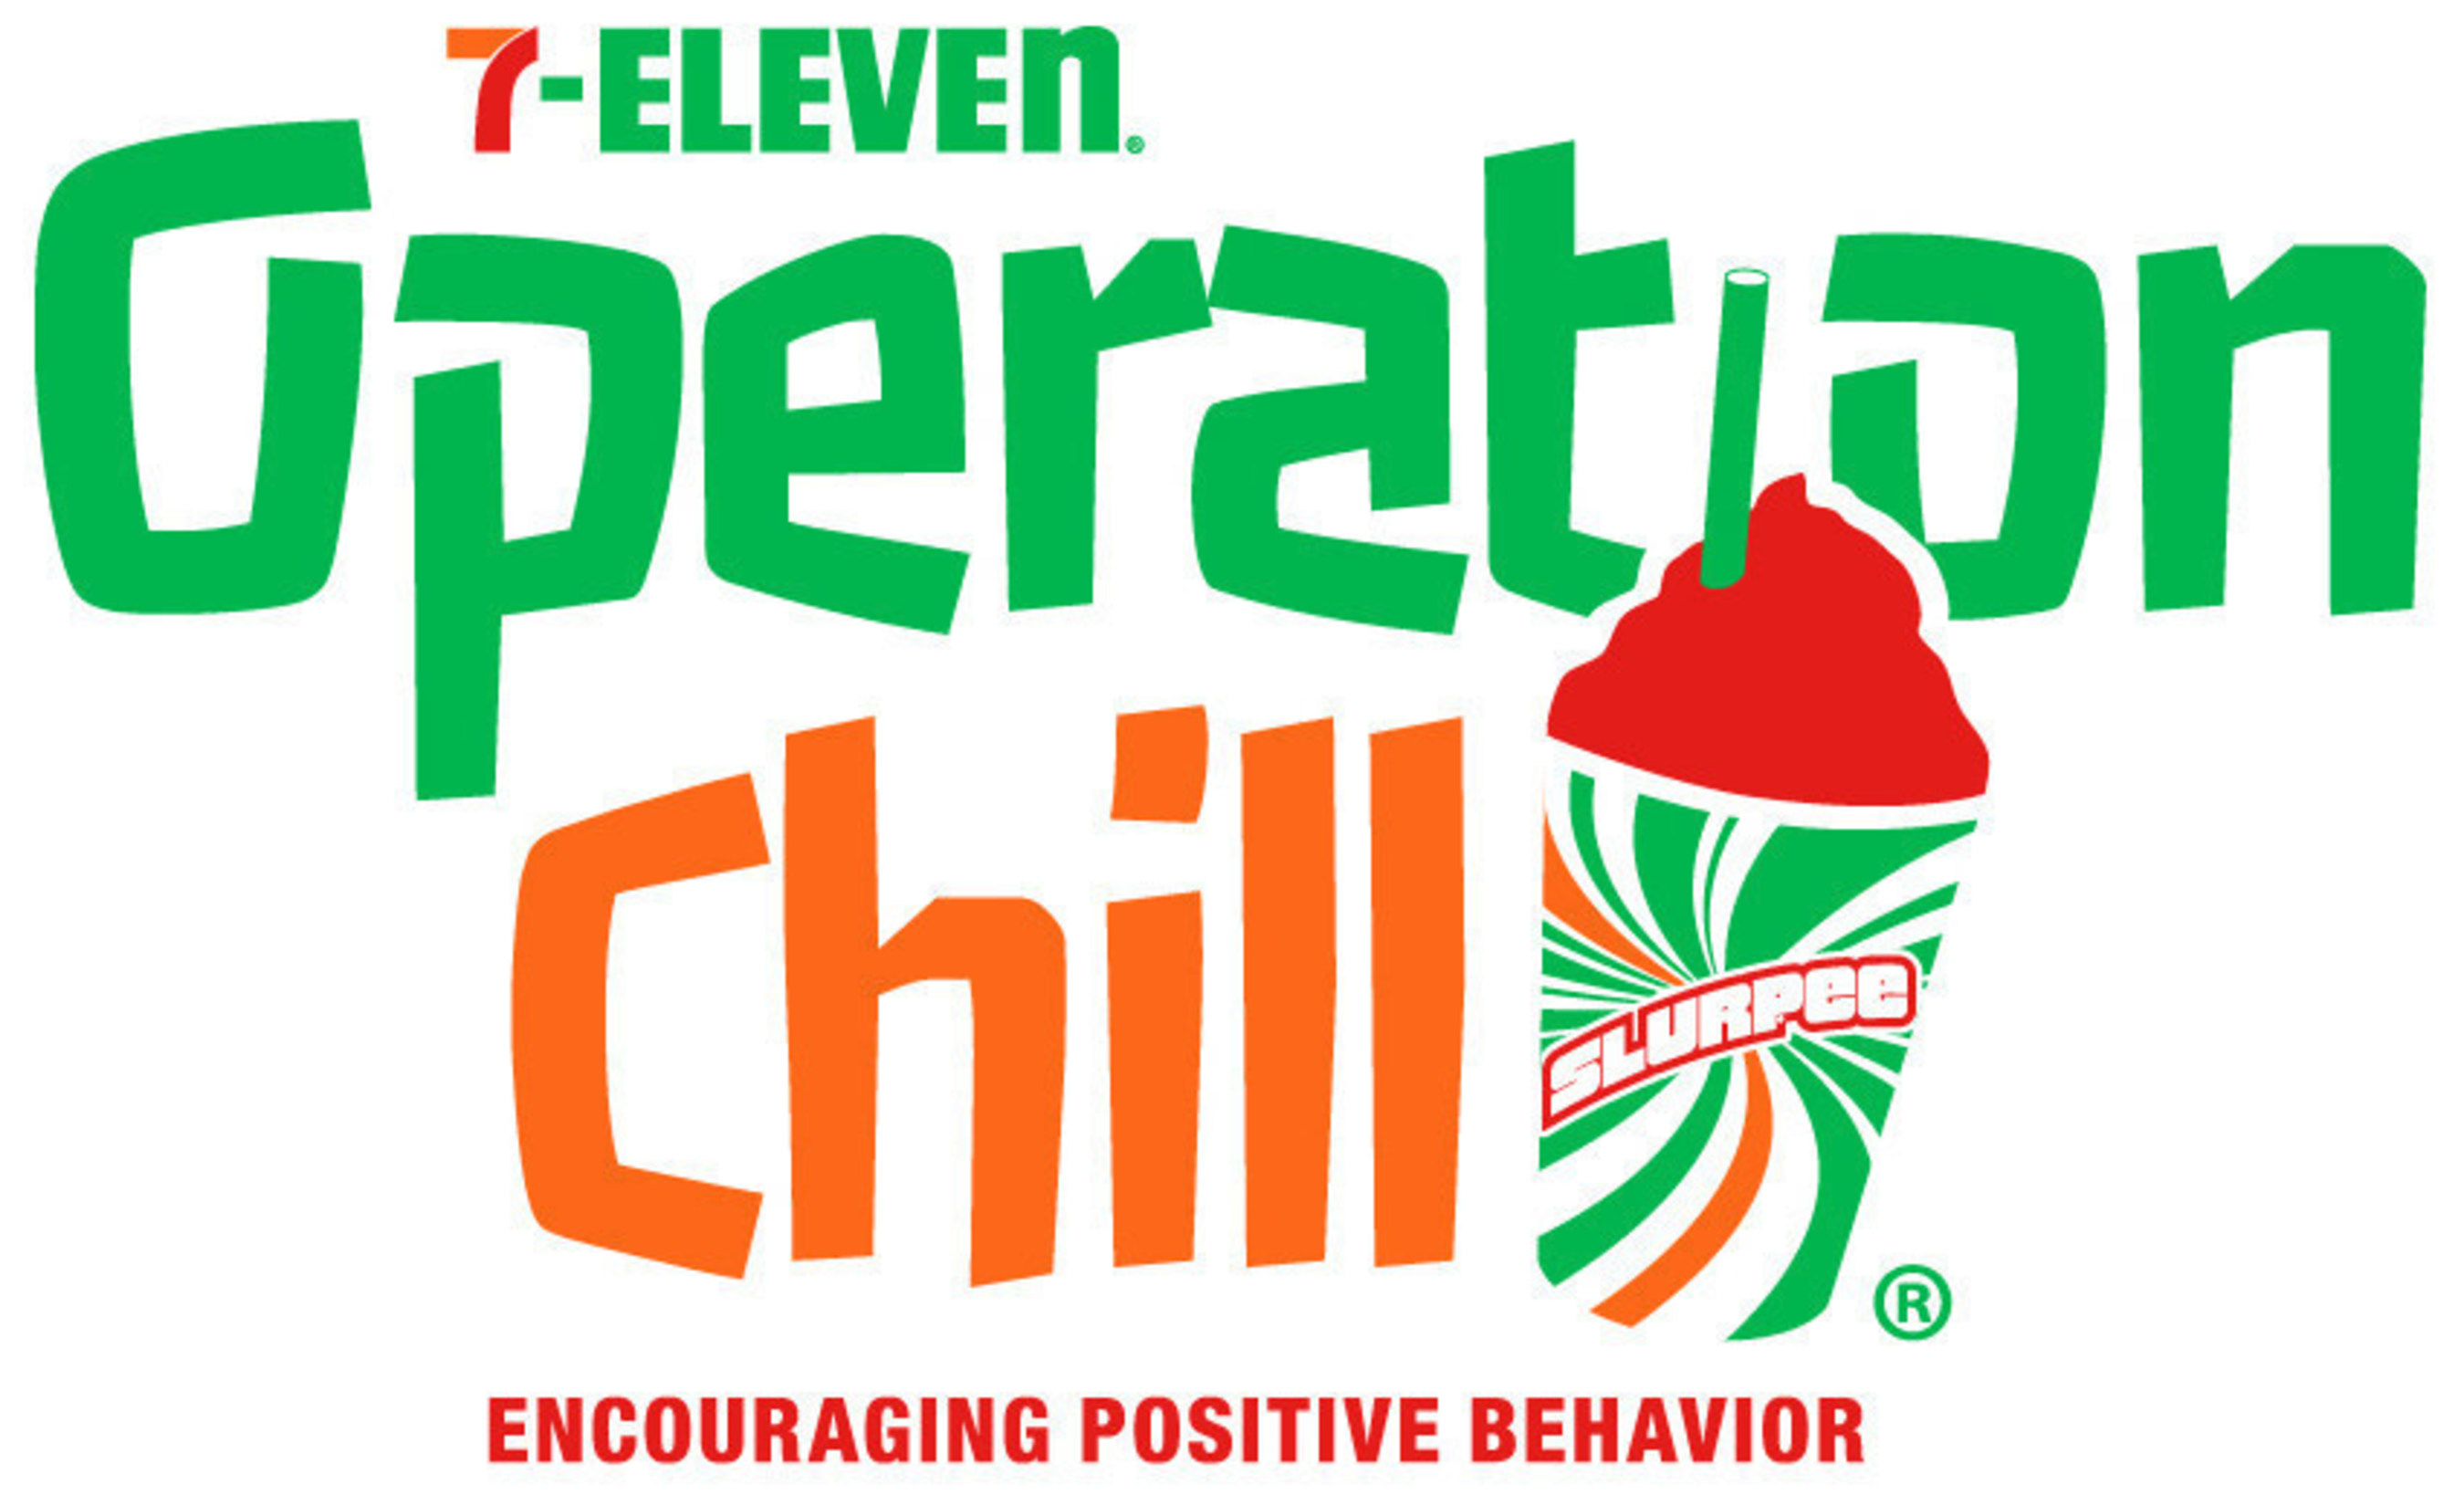 7-Eleven(r) works with law enforcement agencies across the country to distribute free Slurpee(r) drink coupons thorough Operation Chill(r), its popular community-service program that rewards young people for good deeds, positive activities and acts of kindness.